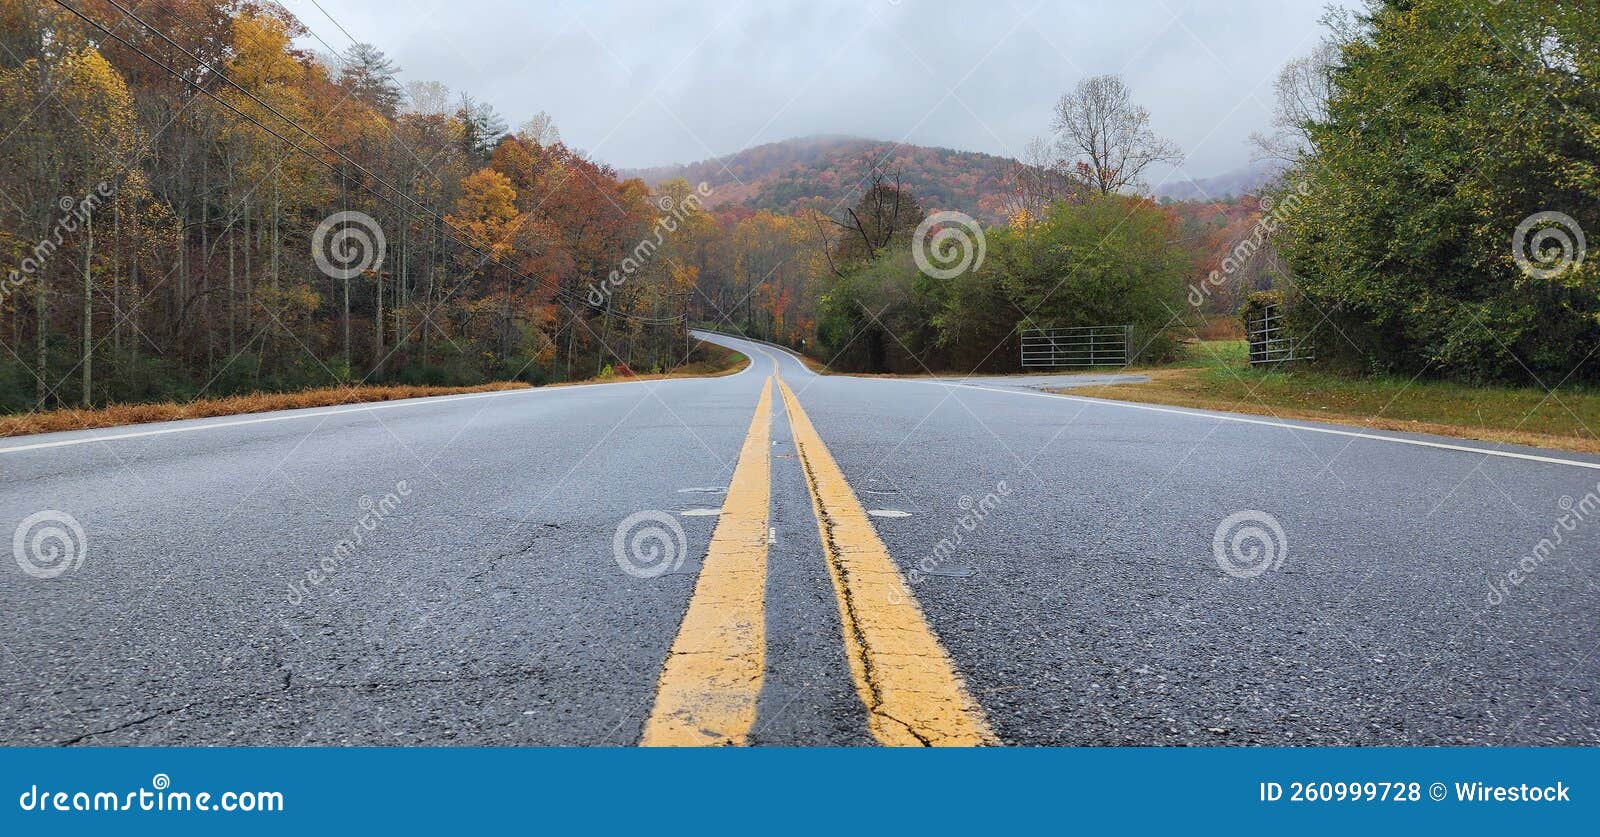 Autumnal Forest And A Straight Asphalt Road With Yellow Lanes In The